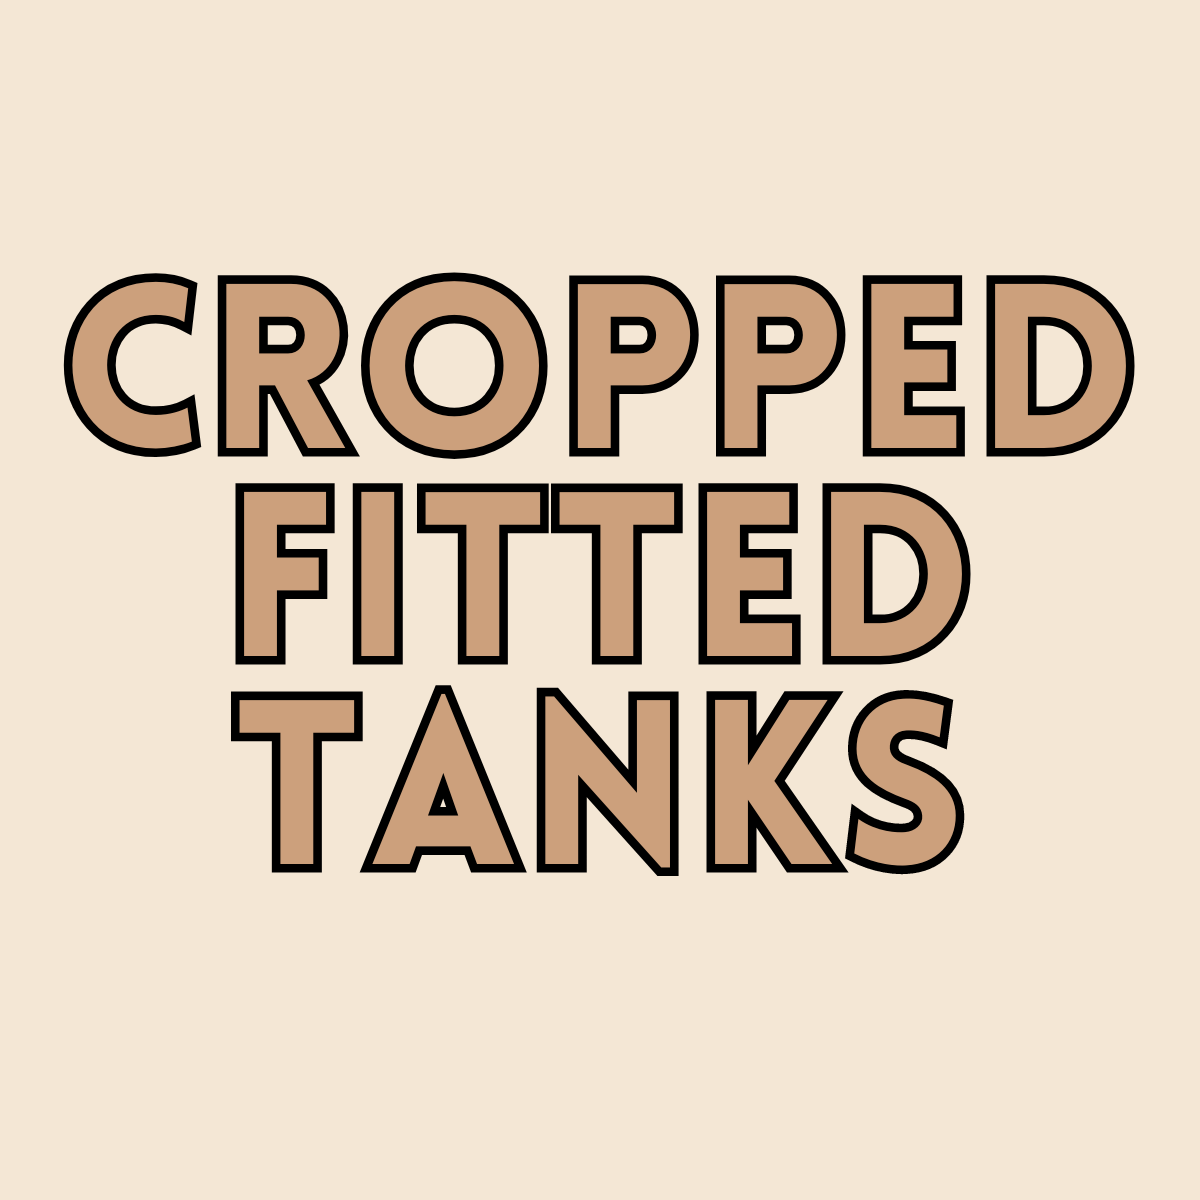 CROPPED FITTED TANKS